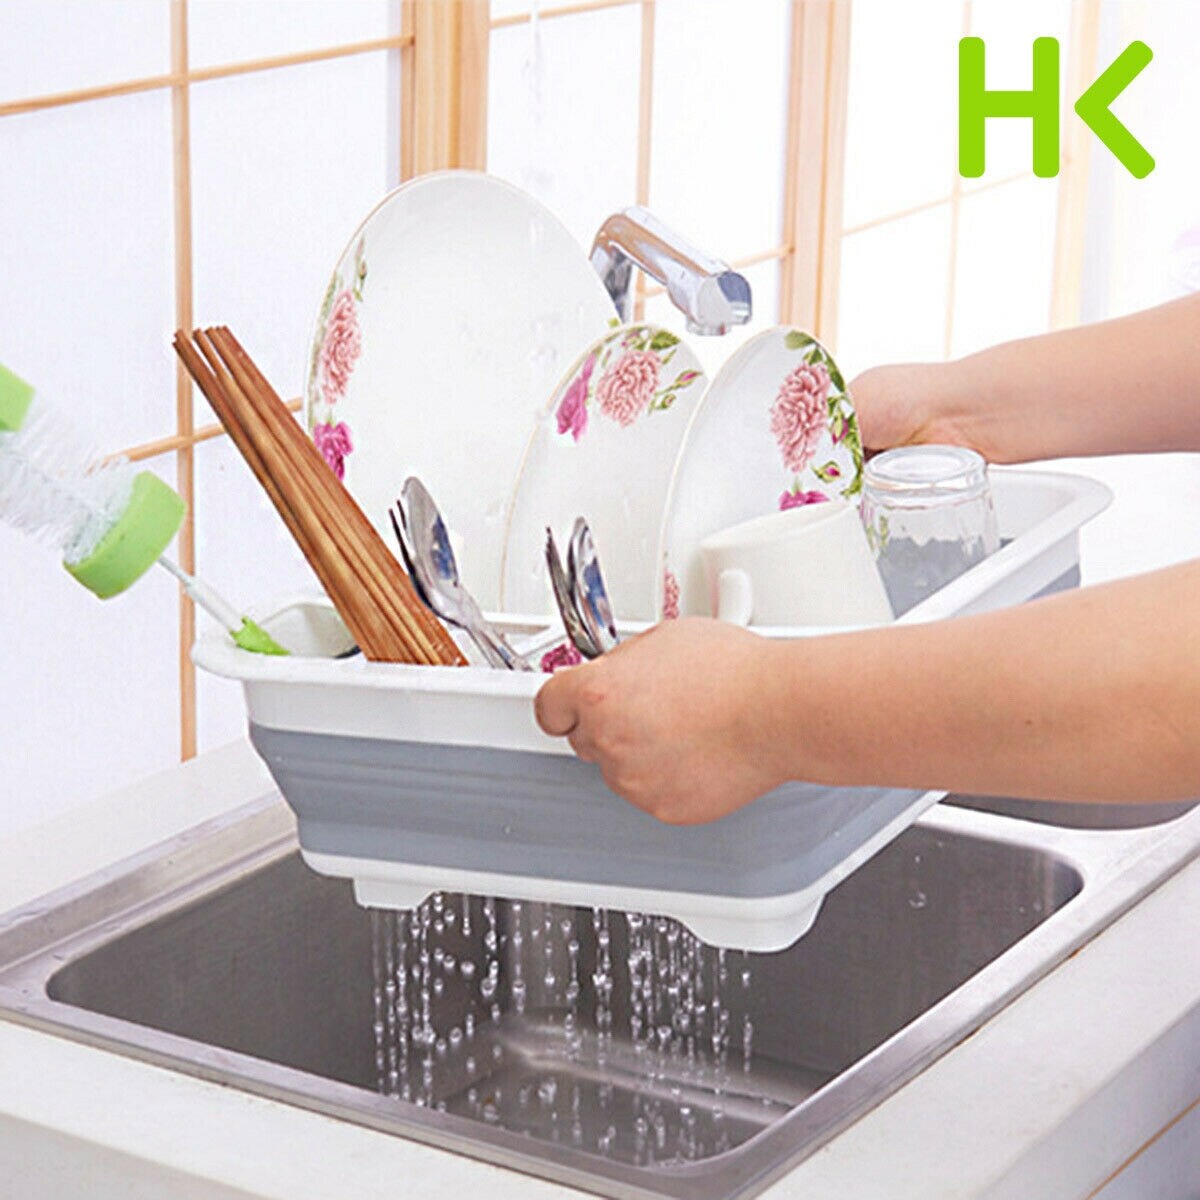 https://ak1.ostkcdn.com/images/products/is/images/direct/d38d8ff25fdf87d6ea66b9fa7fddf28e8c9635bf/Antimicrobial-Dish-Drying-Rack-Collapsible-Dish-Rack-Over-The-Sink-Dish-Drainer-Extra-Large-Capacity-for-Maximum-Storage---M.jpg